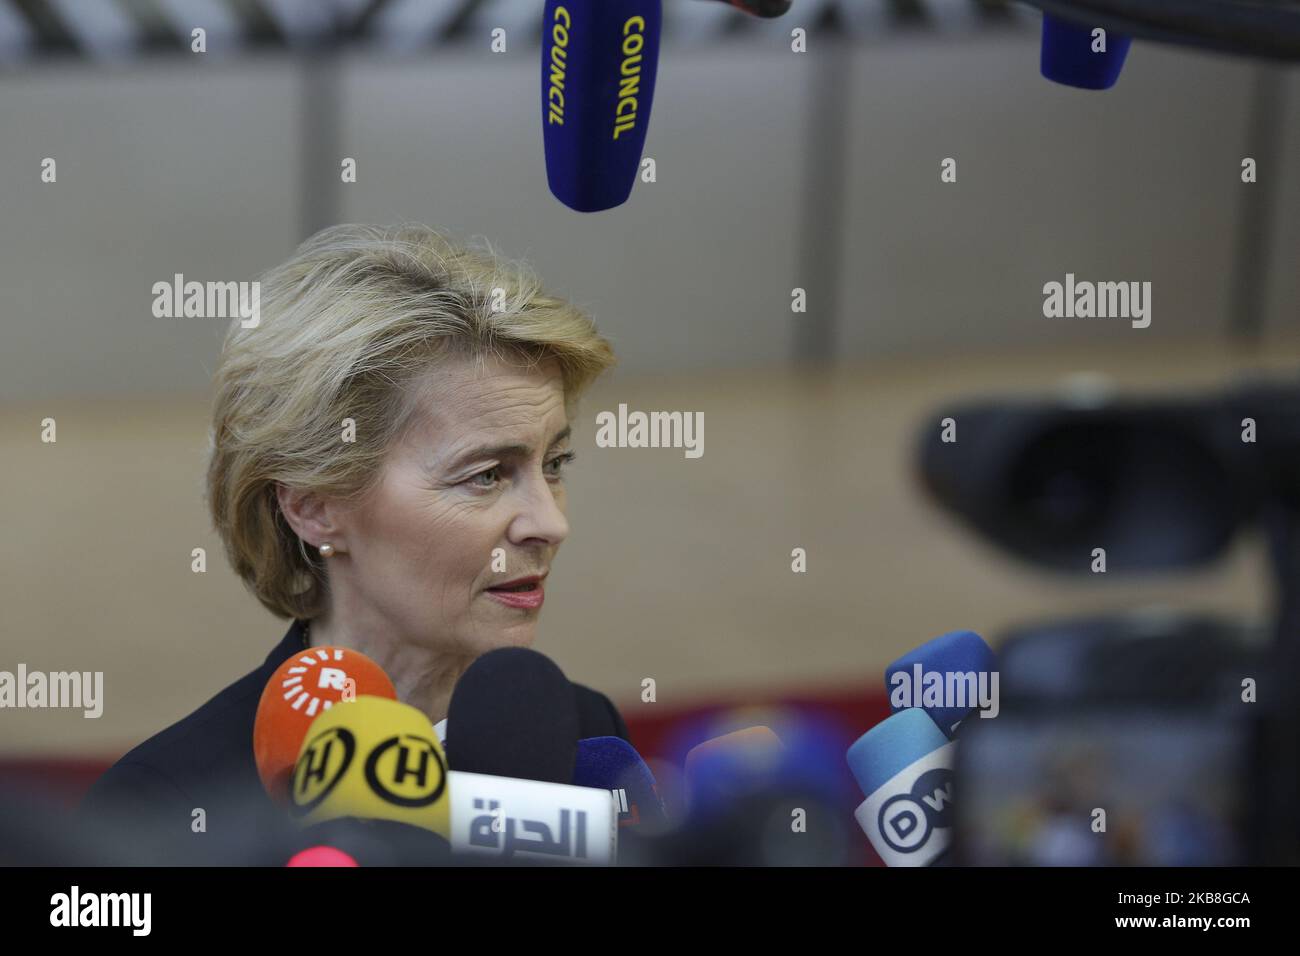 Ursula von der Leyen, the German Persident-elect of the European Council at the European Council summit with the leaders of the EU having a media statement briefing for the special European Council and Article 50 for Brexit on October 17, 2019. (Photo by Nicolas Economou/NurPhoto) Stock Photo